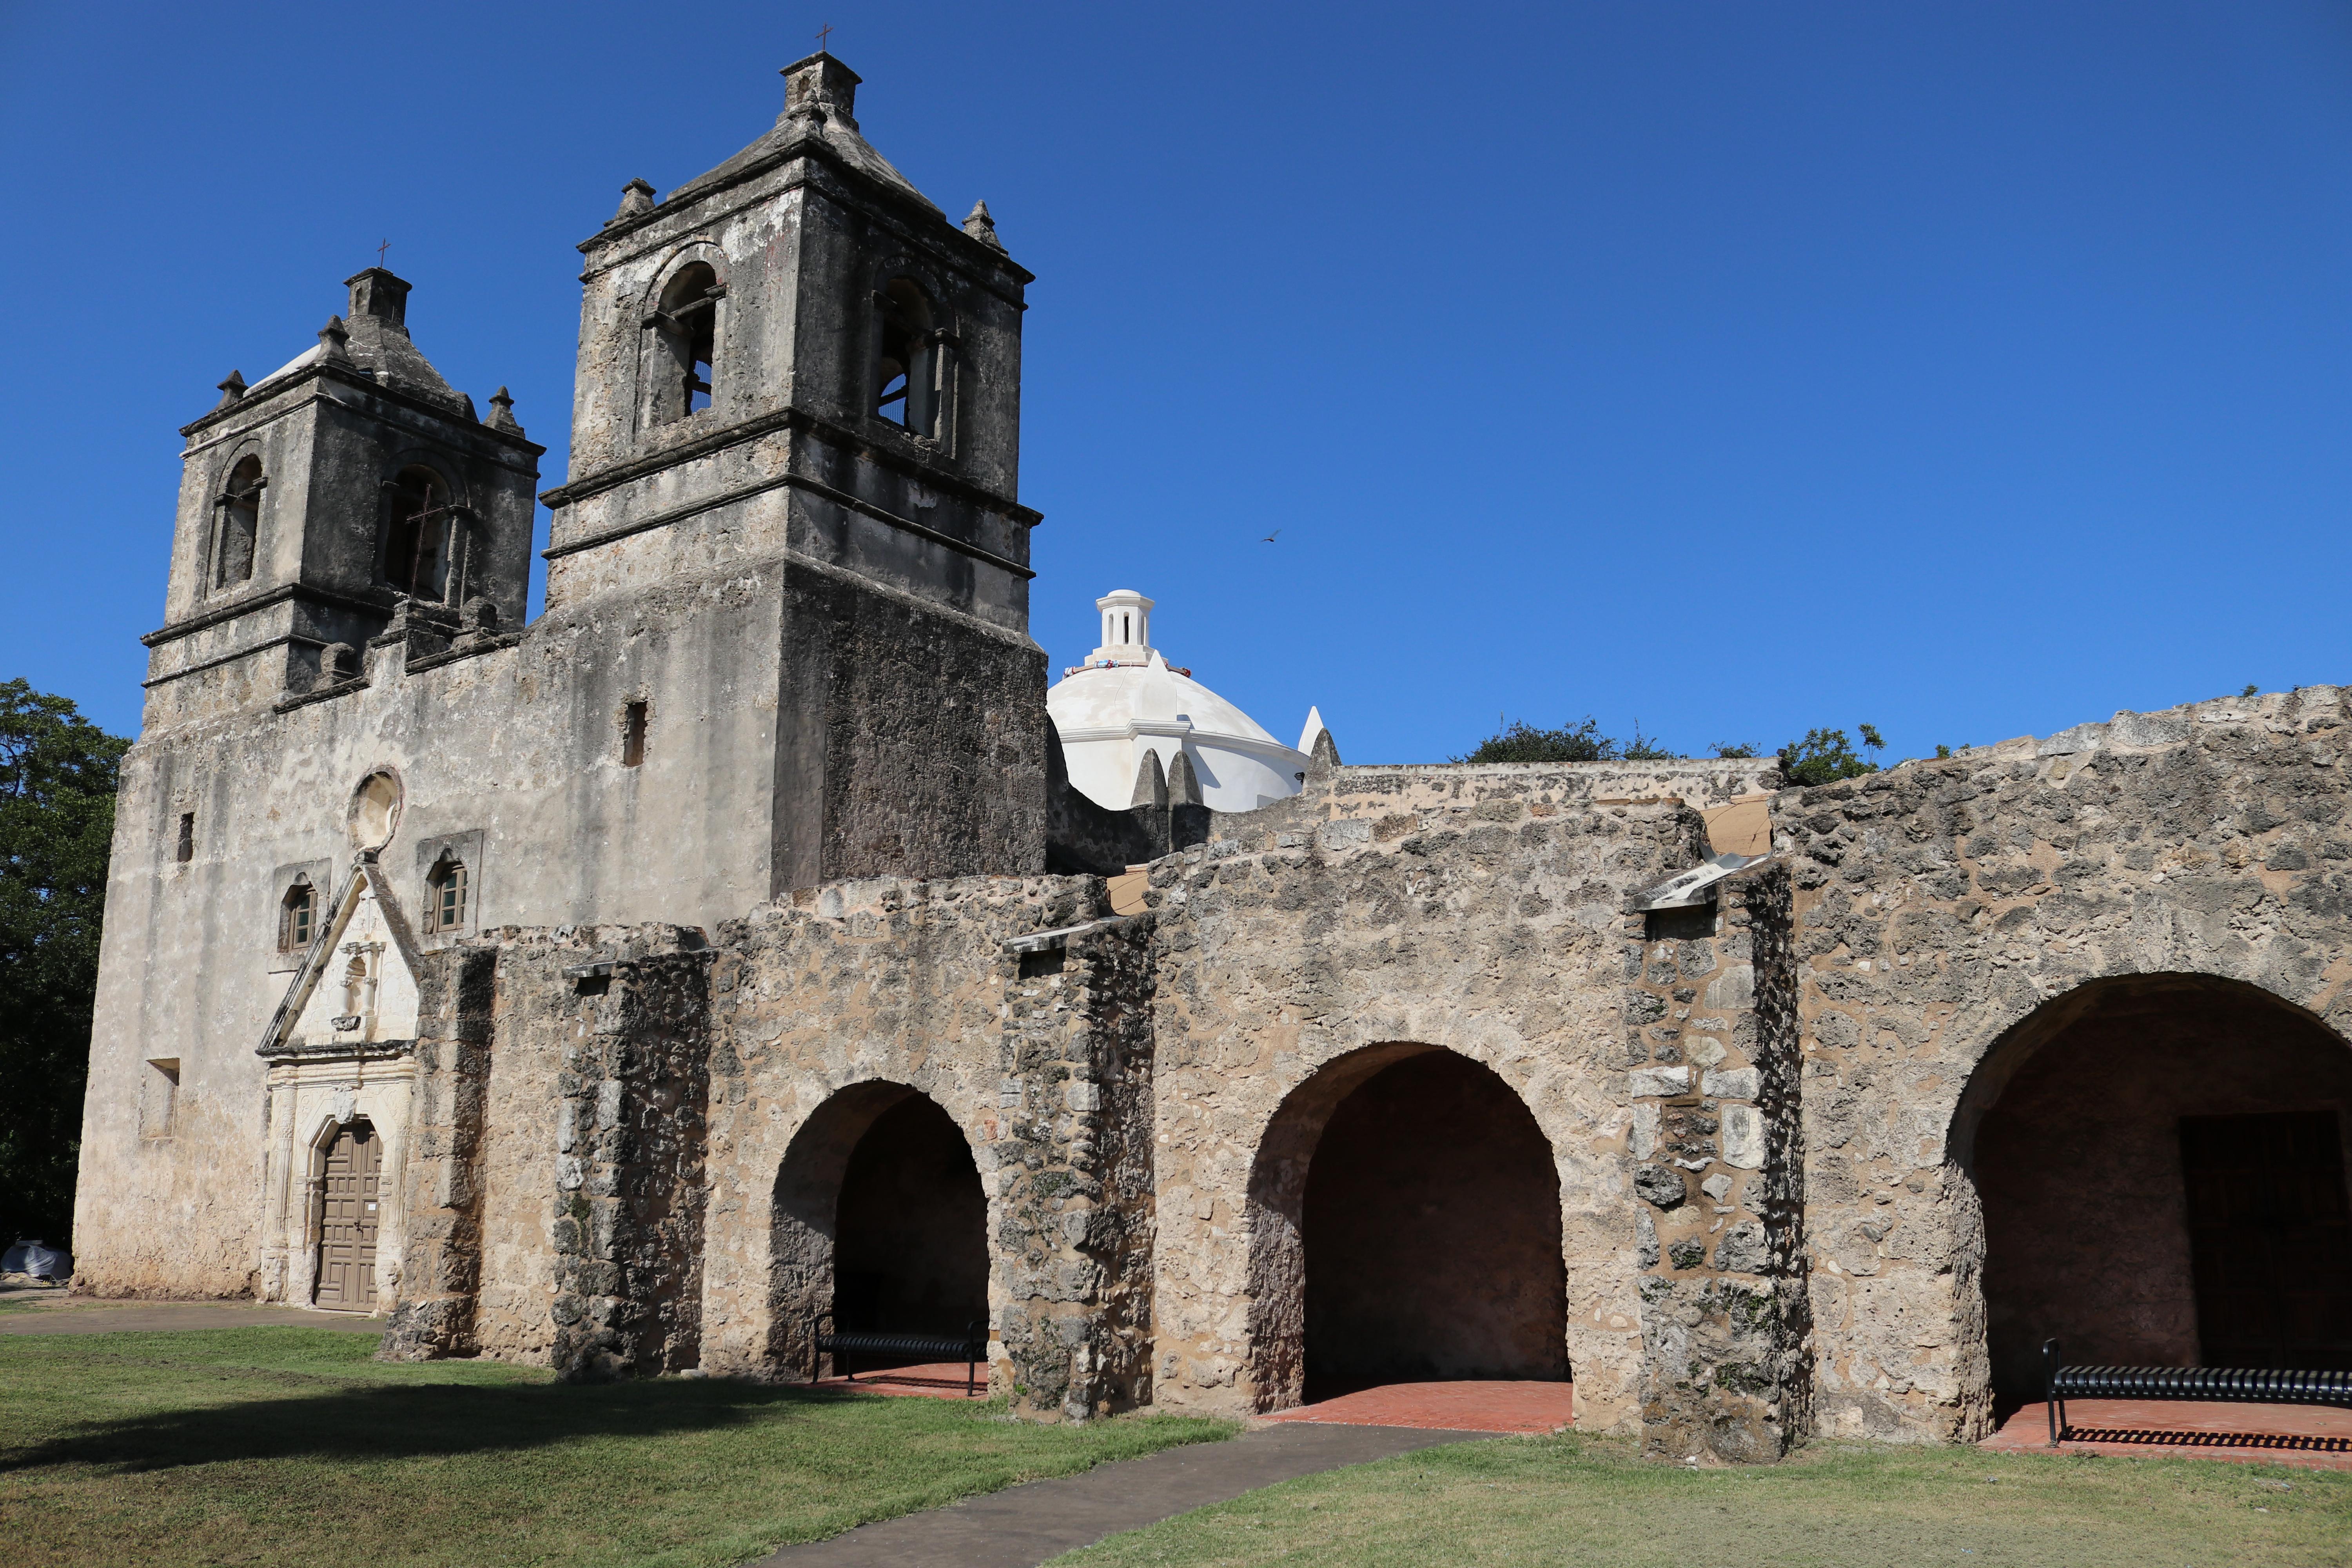 Mission Concepcion convento with church in background.